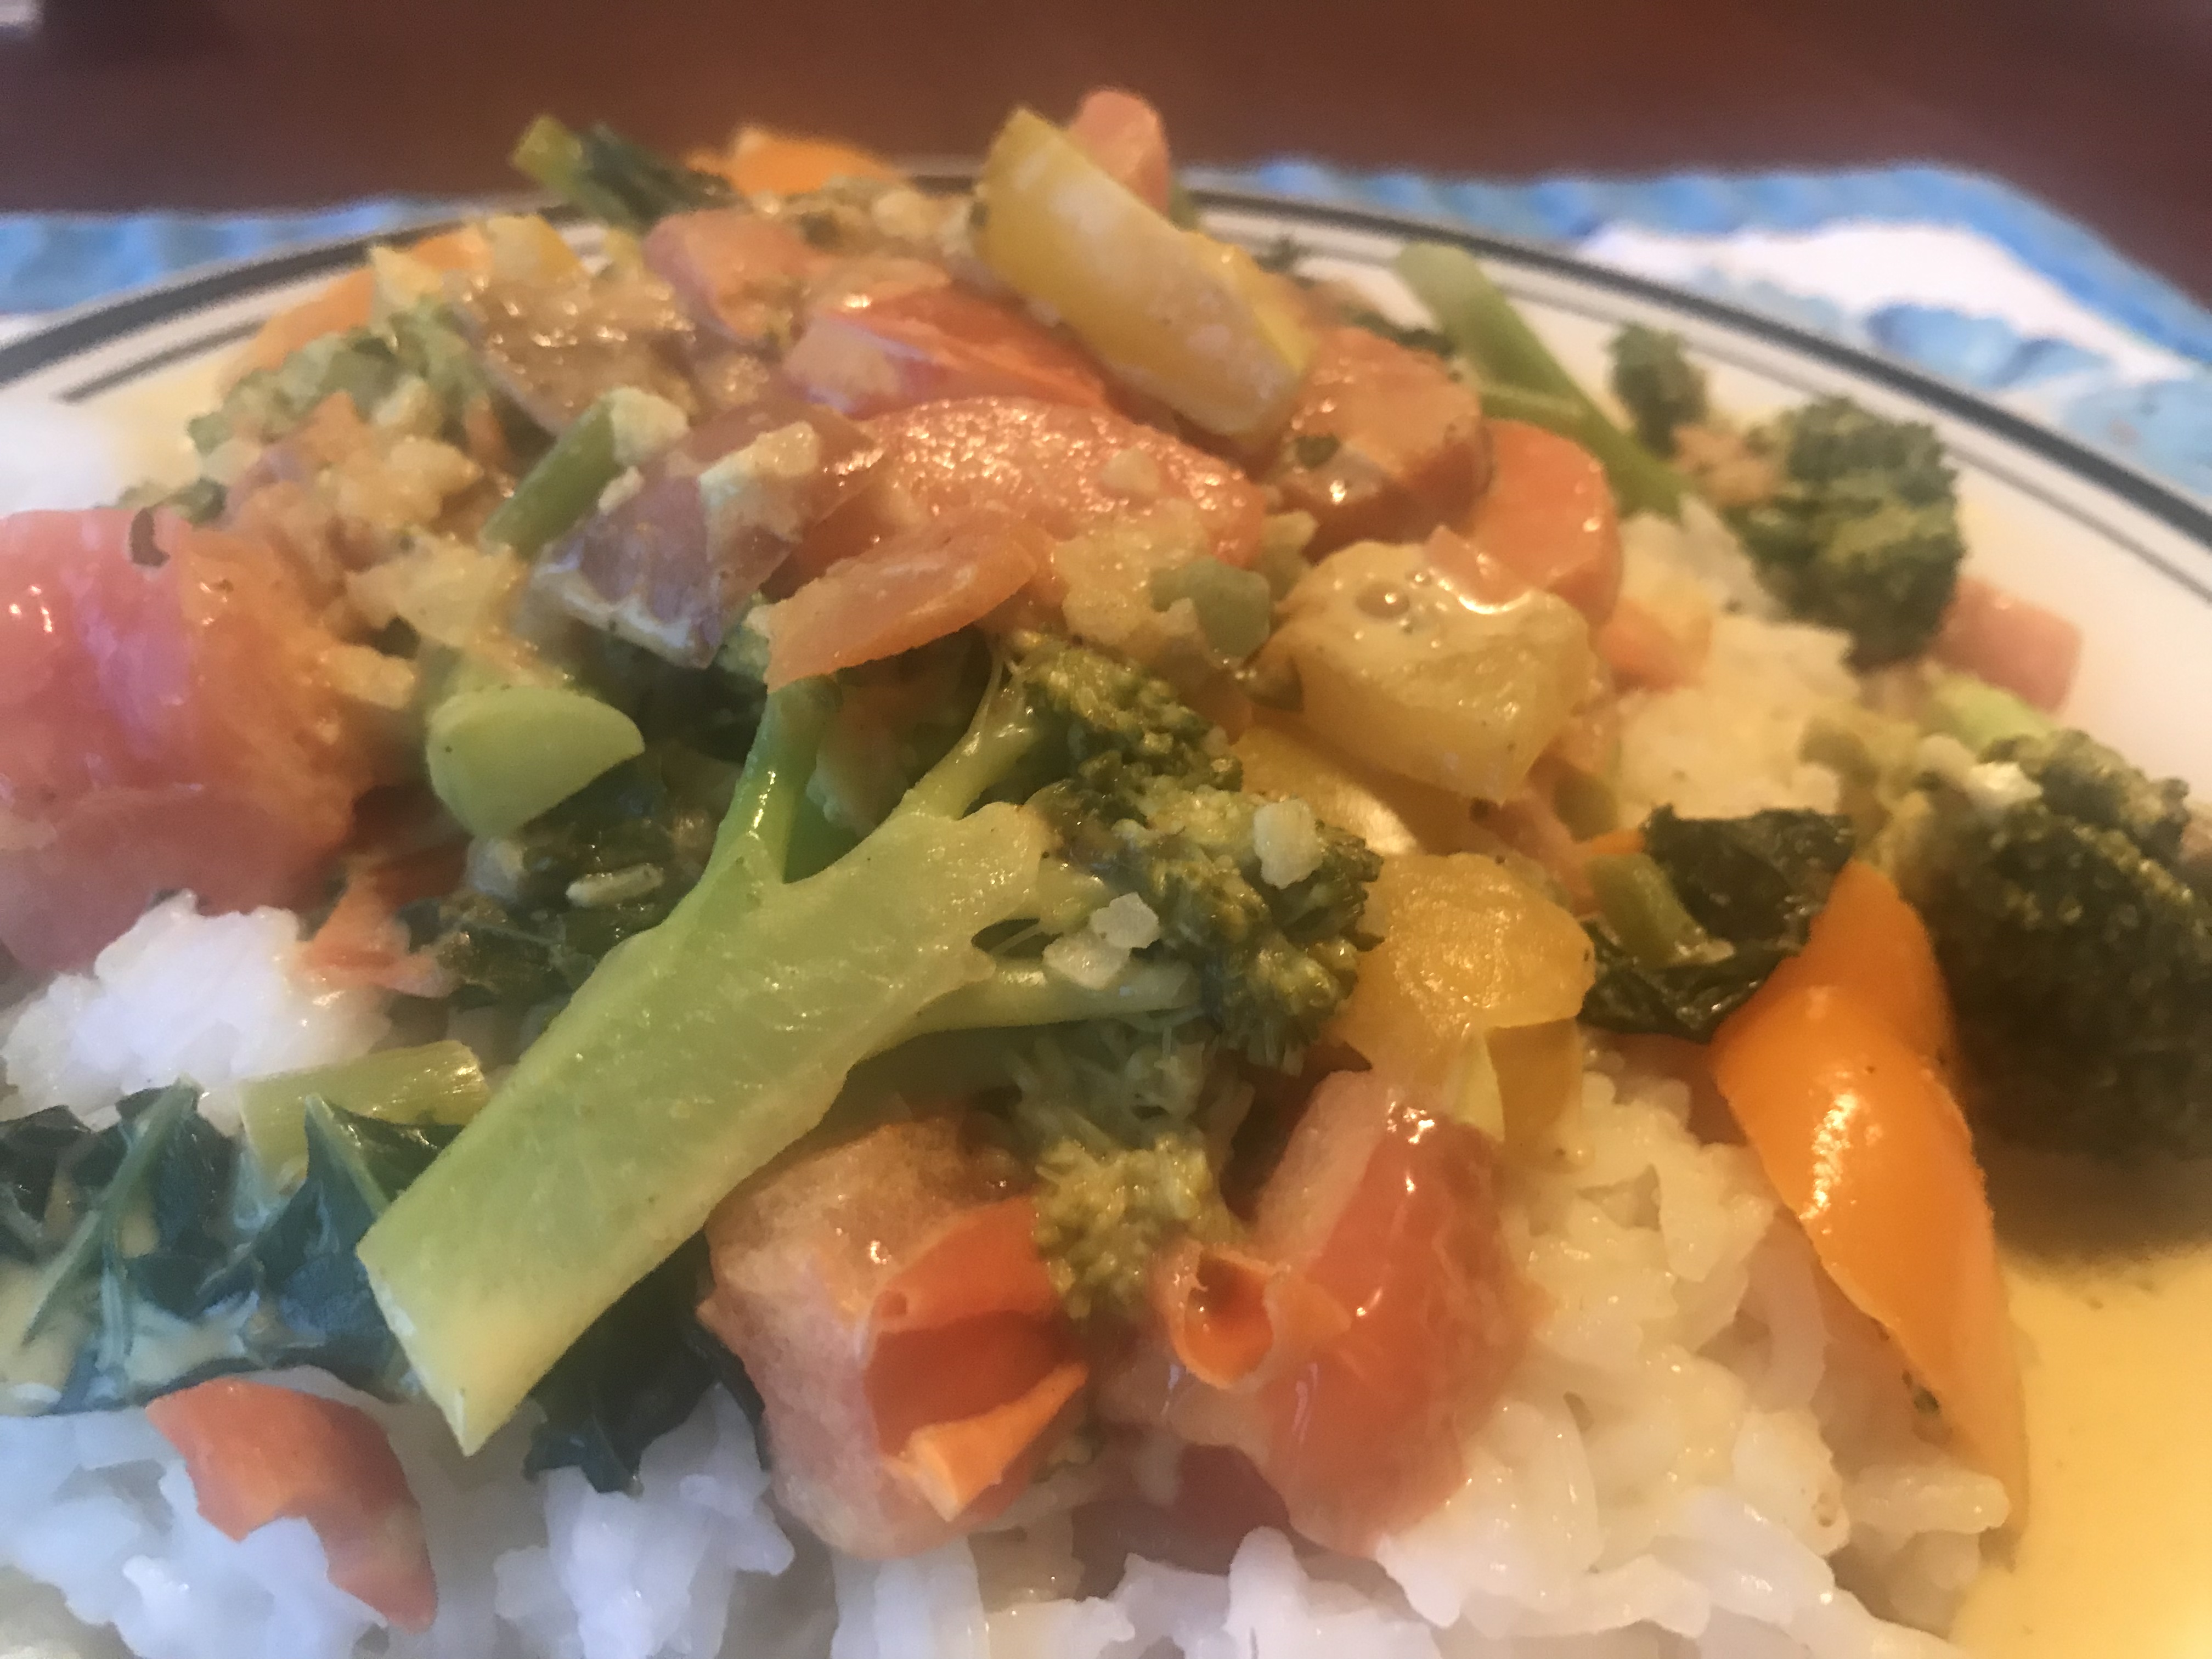 mild coconut curry sauce and vegetables on rice